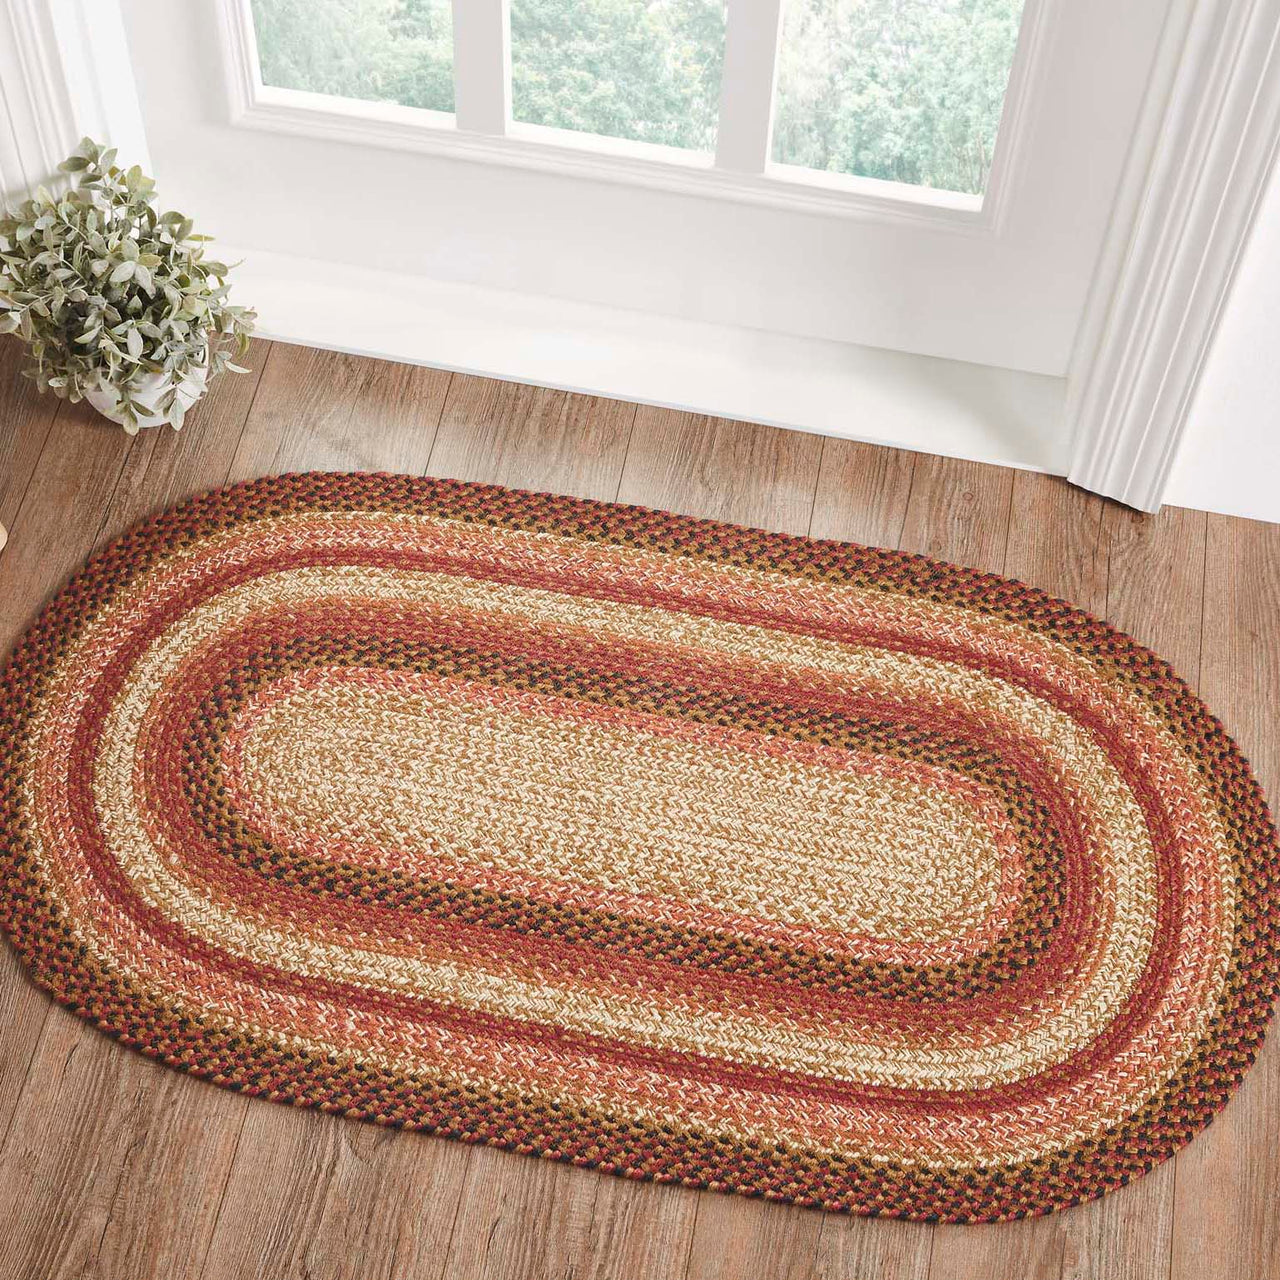 Ginger Spice Jute Braided Rug Oval with Rug Pad 27"x48" VHC Brands